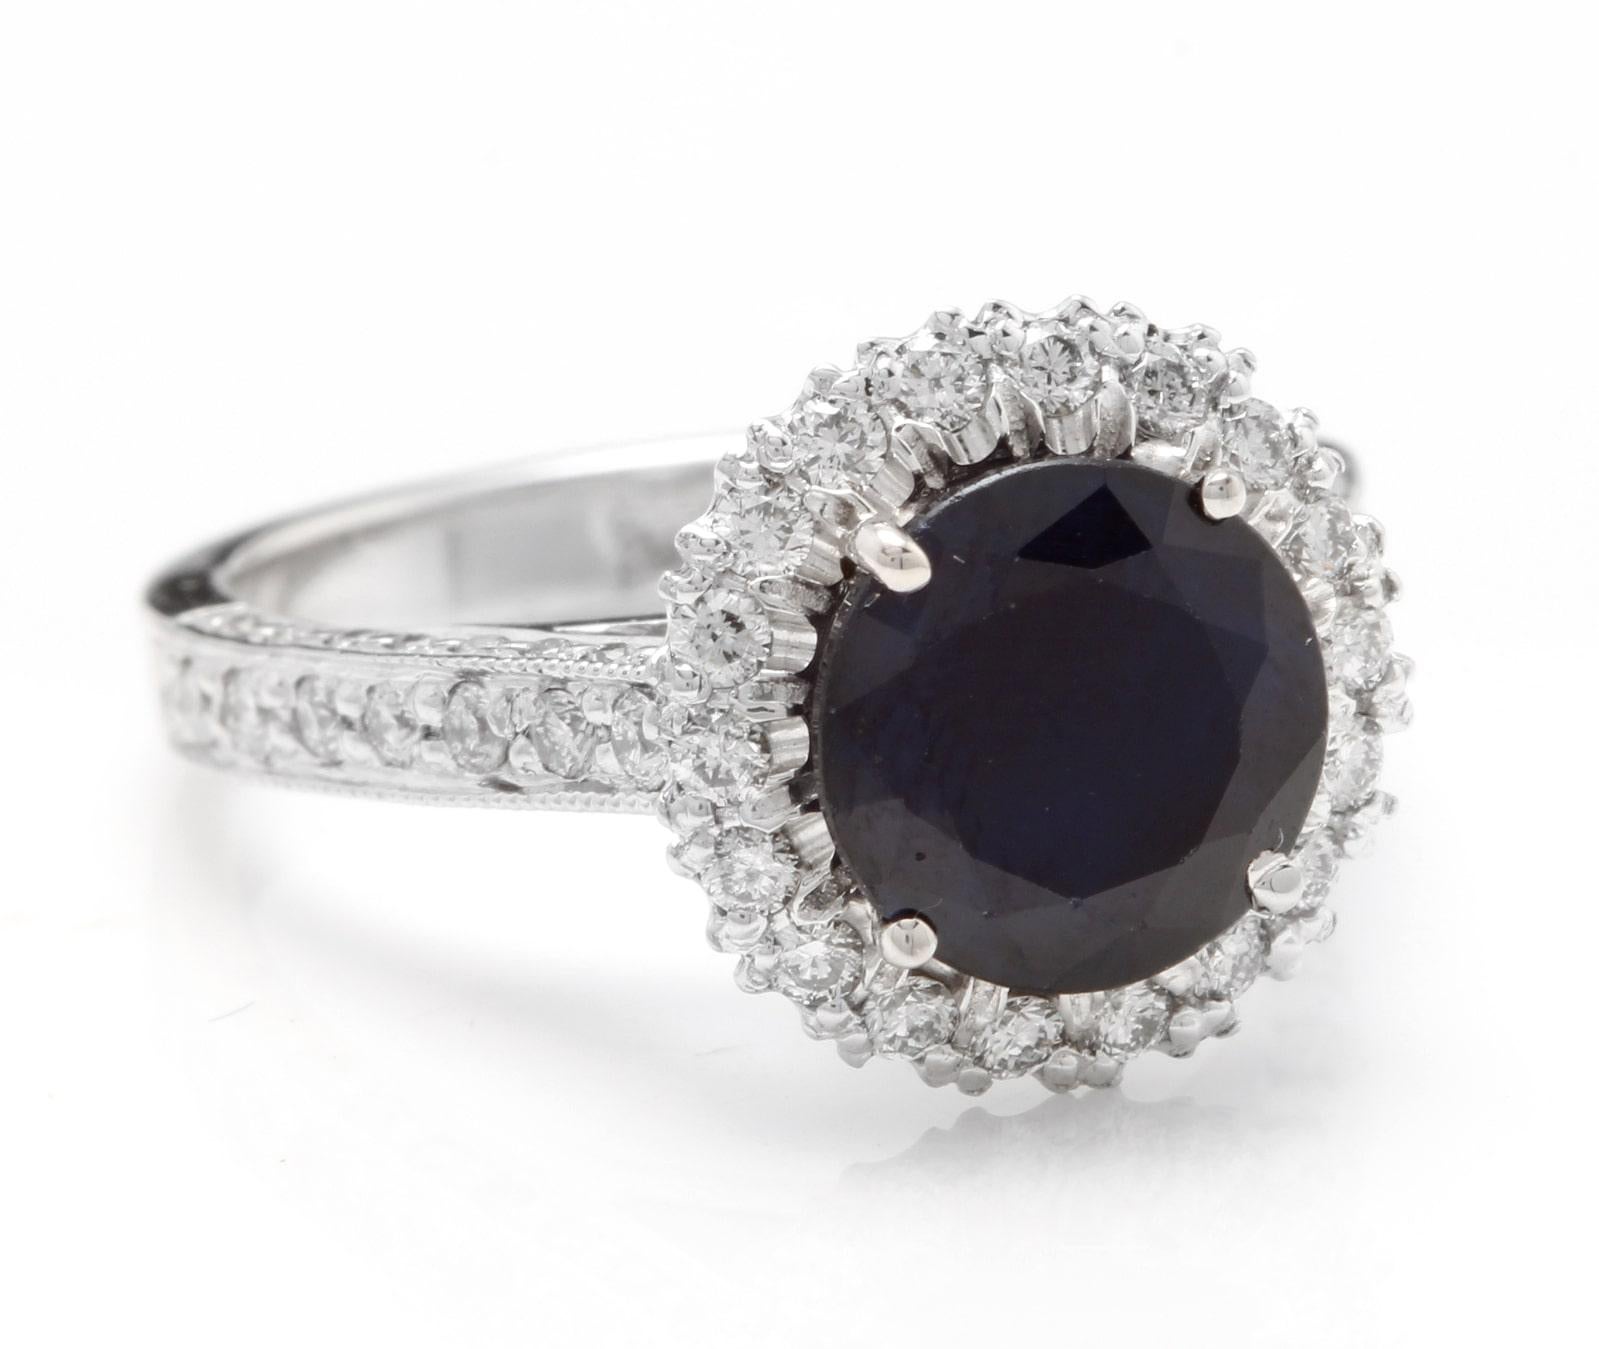 2.35 Carats Exquisite Natural Blue Sapphire and Diamond 14K Solid White Gold Ring

Total Natural Blue Sapphire Weight is: Approx. 1.65 Carats

Sapphire Measures: Approx. 8.00mm

Sapphire Treatment: (Diffusion)

Natural Round Diamonds Weight: Approx.